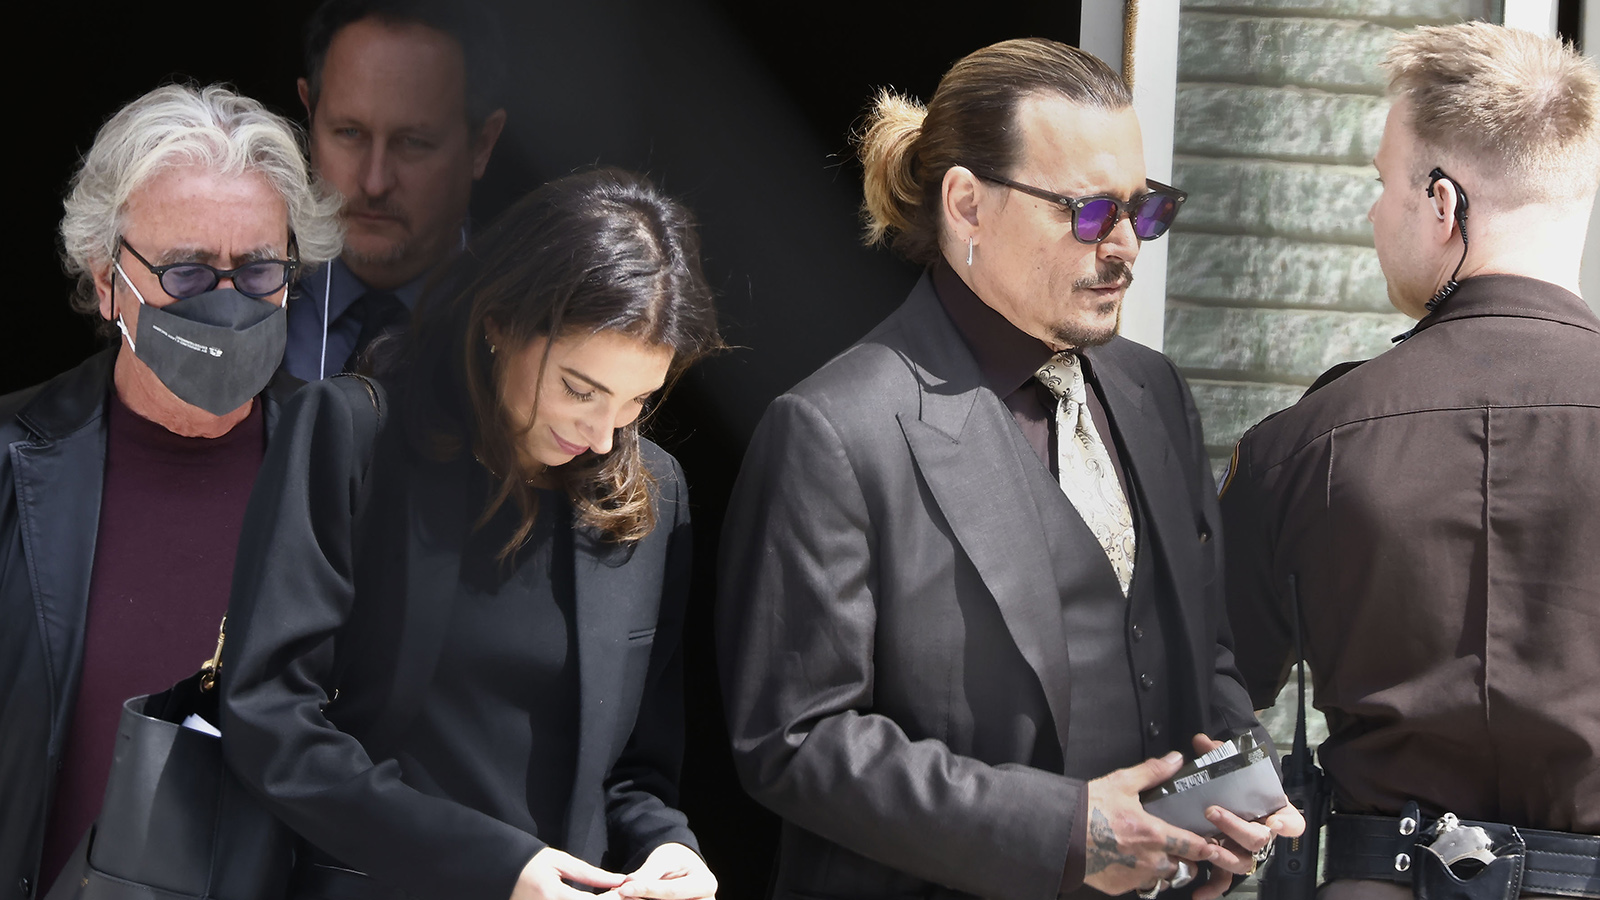 Johnny Depp and team outside defamation trial